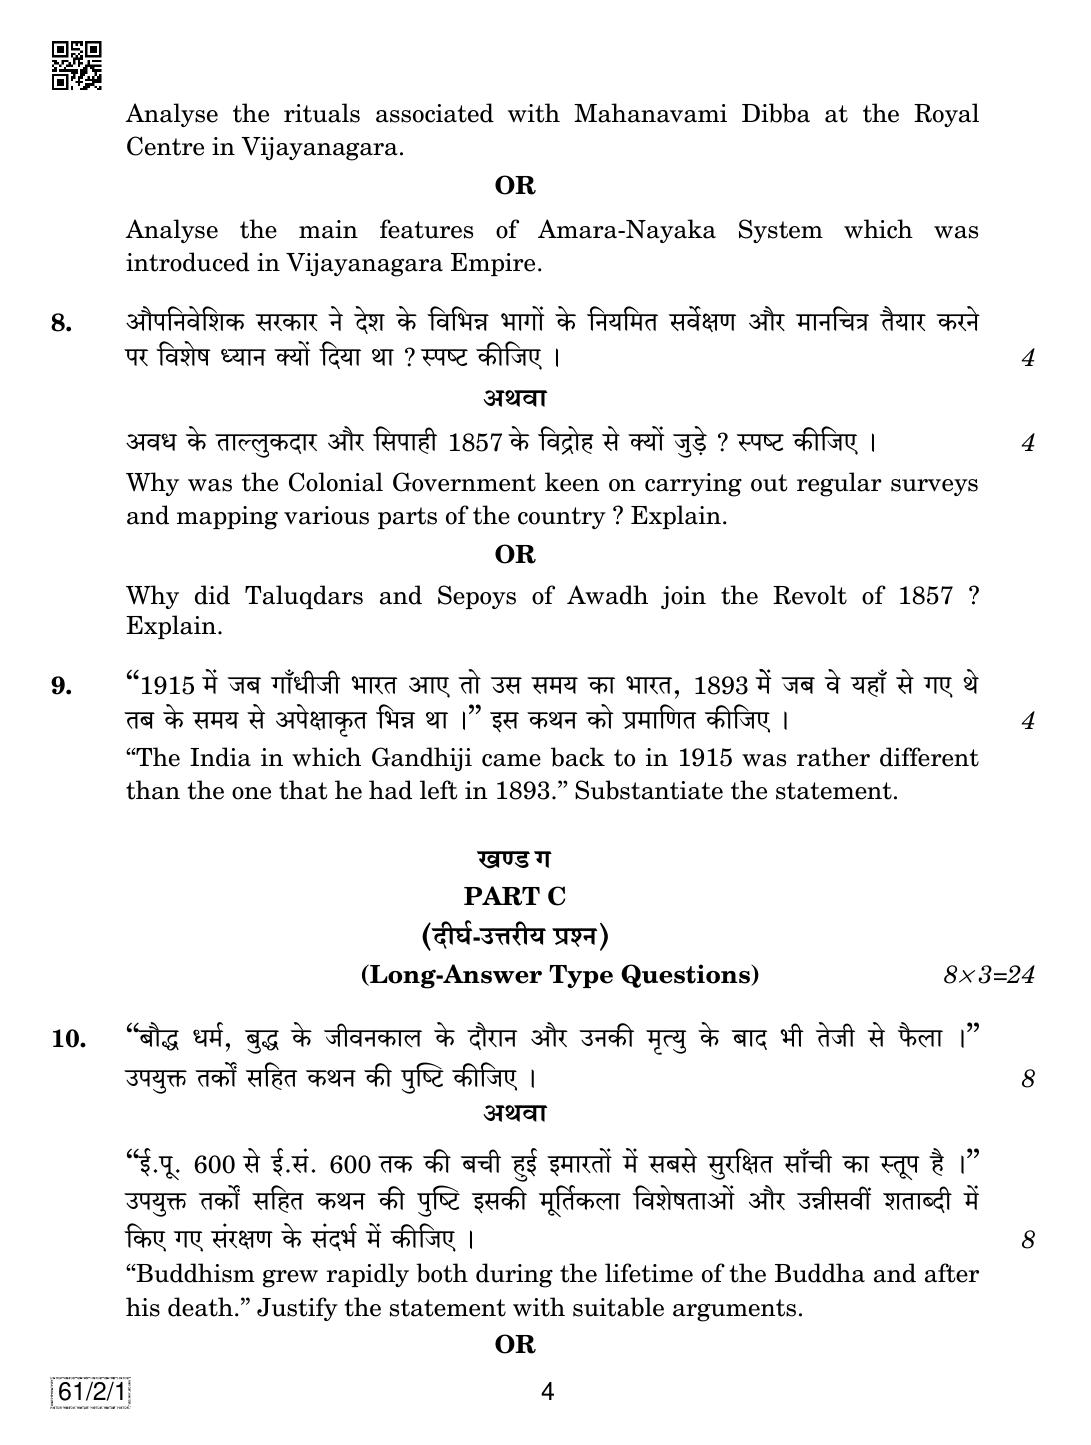 CBSE Class 12 61-2-1 History 2019 Question Paper - Page 4